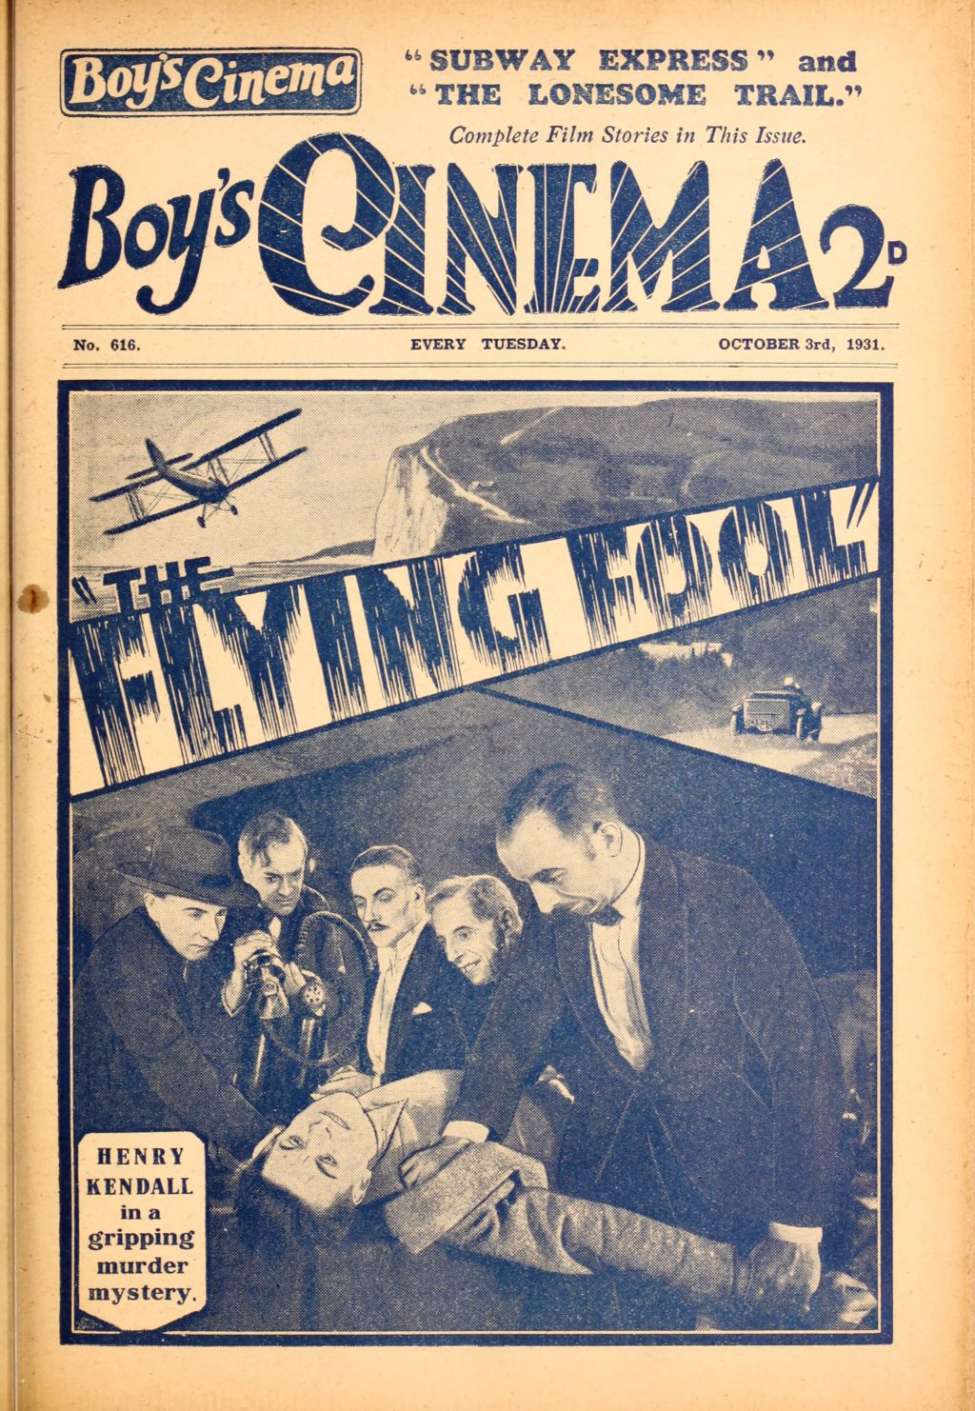 Book Cover For Boy's Cinema 616 - The Flying Fool - Henry Kendall